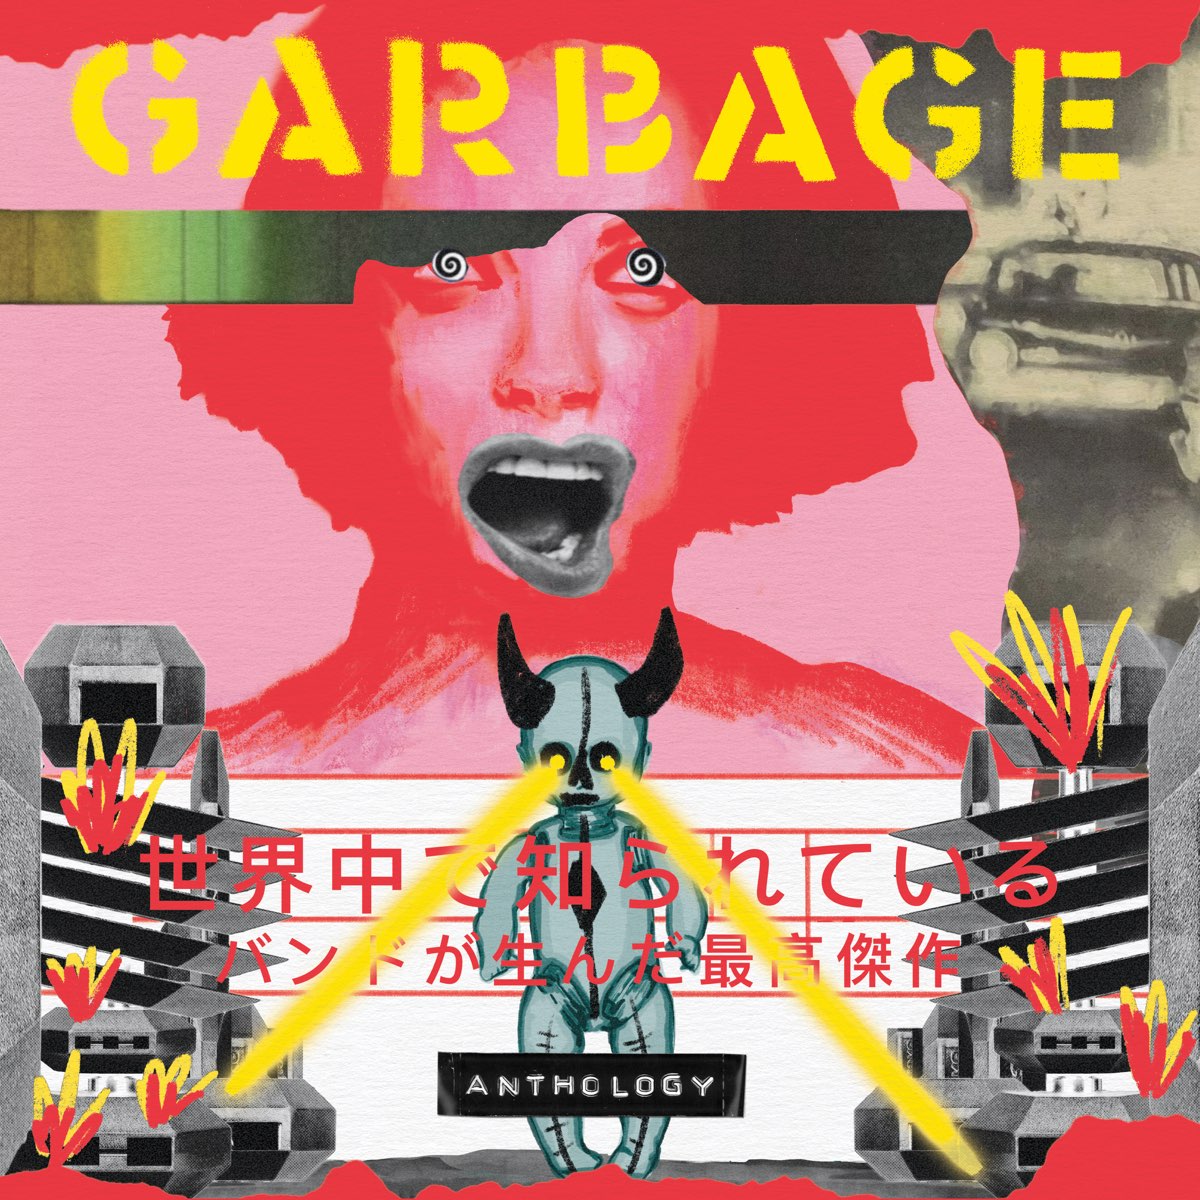 Anthology by Garbage on Apple Music